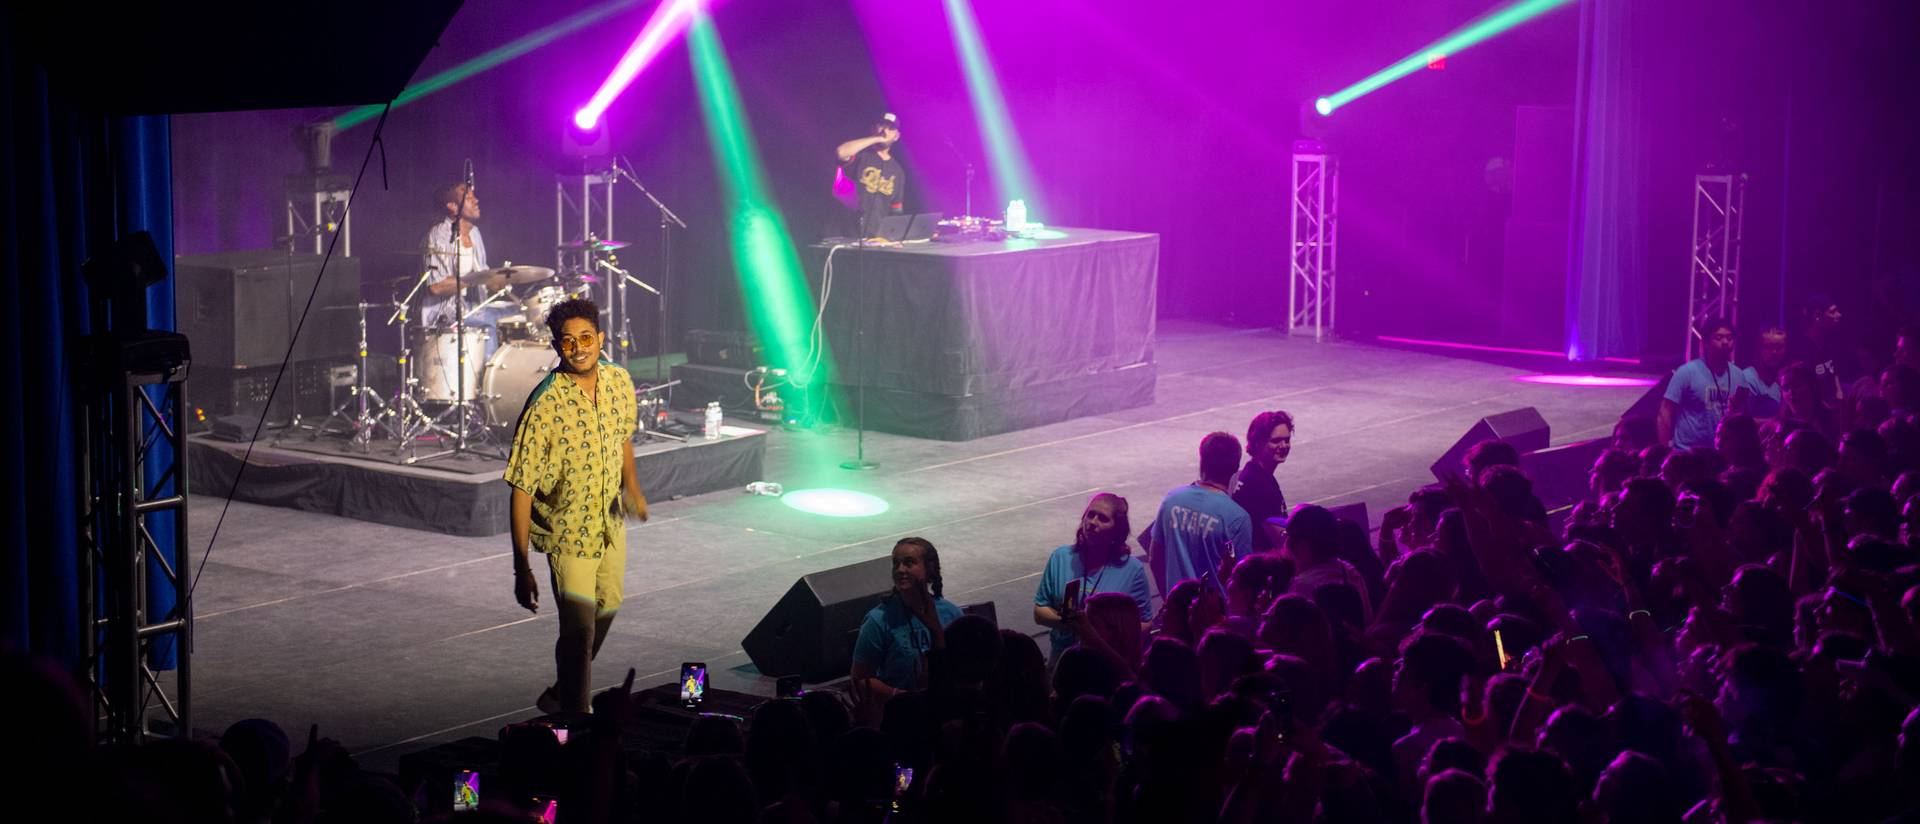 Hip hop singer Bryce Vine playing a 2022 concert in Zorn Arena